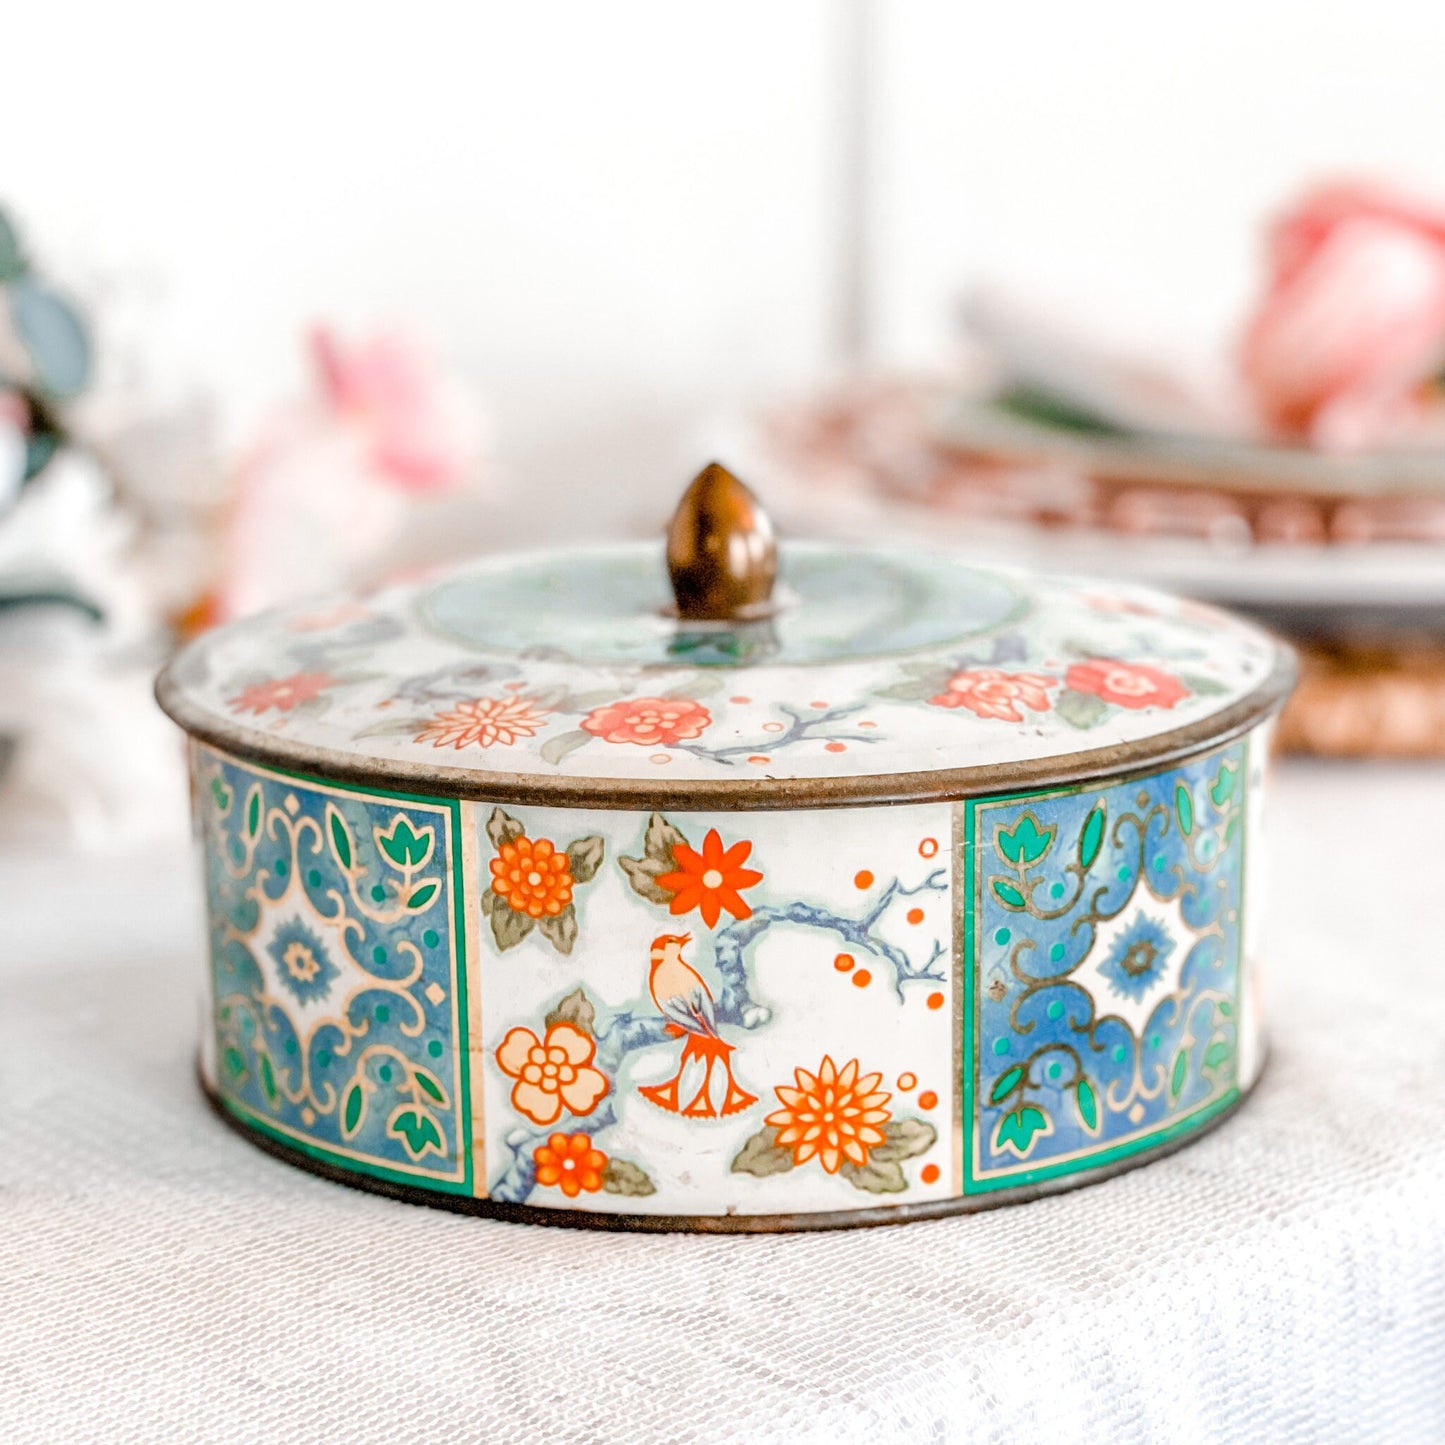 Scented Candle in Vintage Biscuit Tin